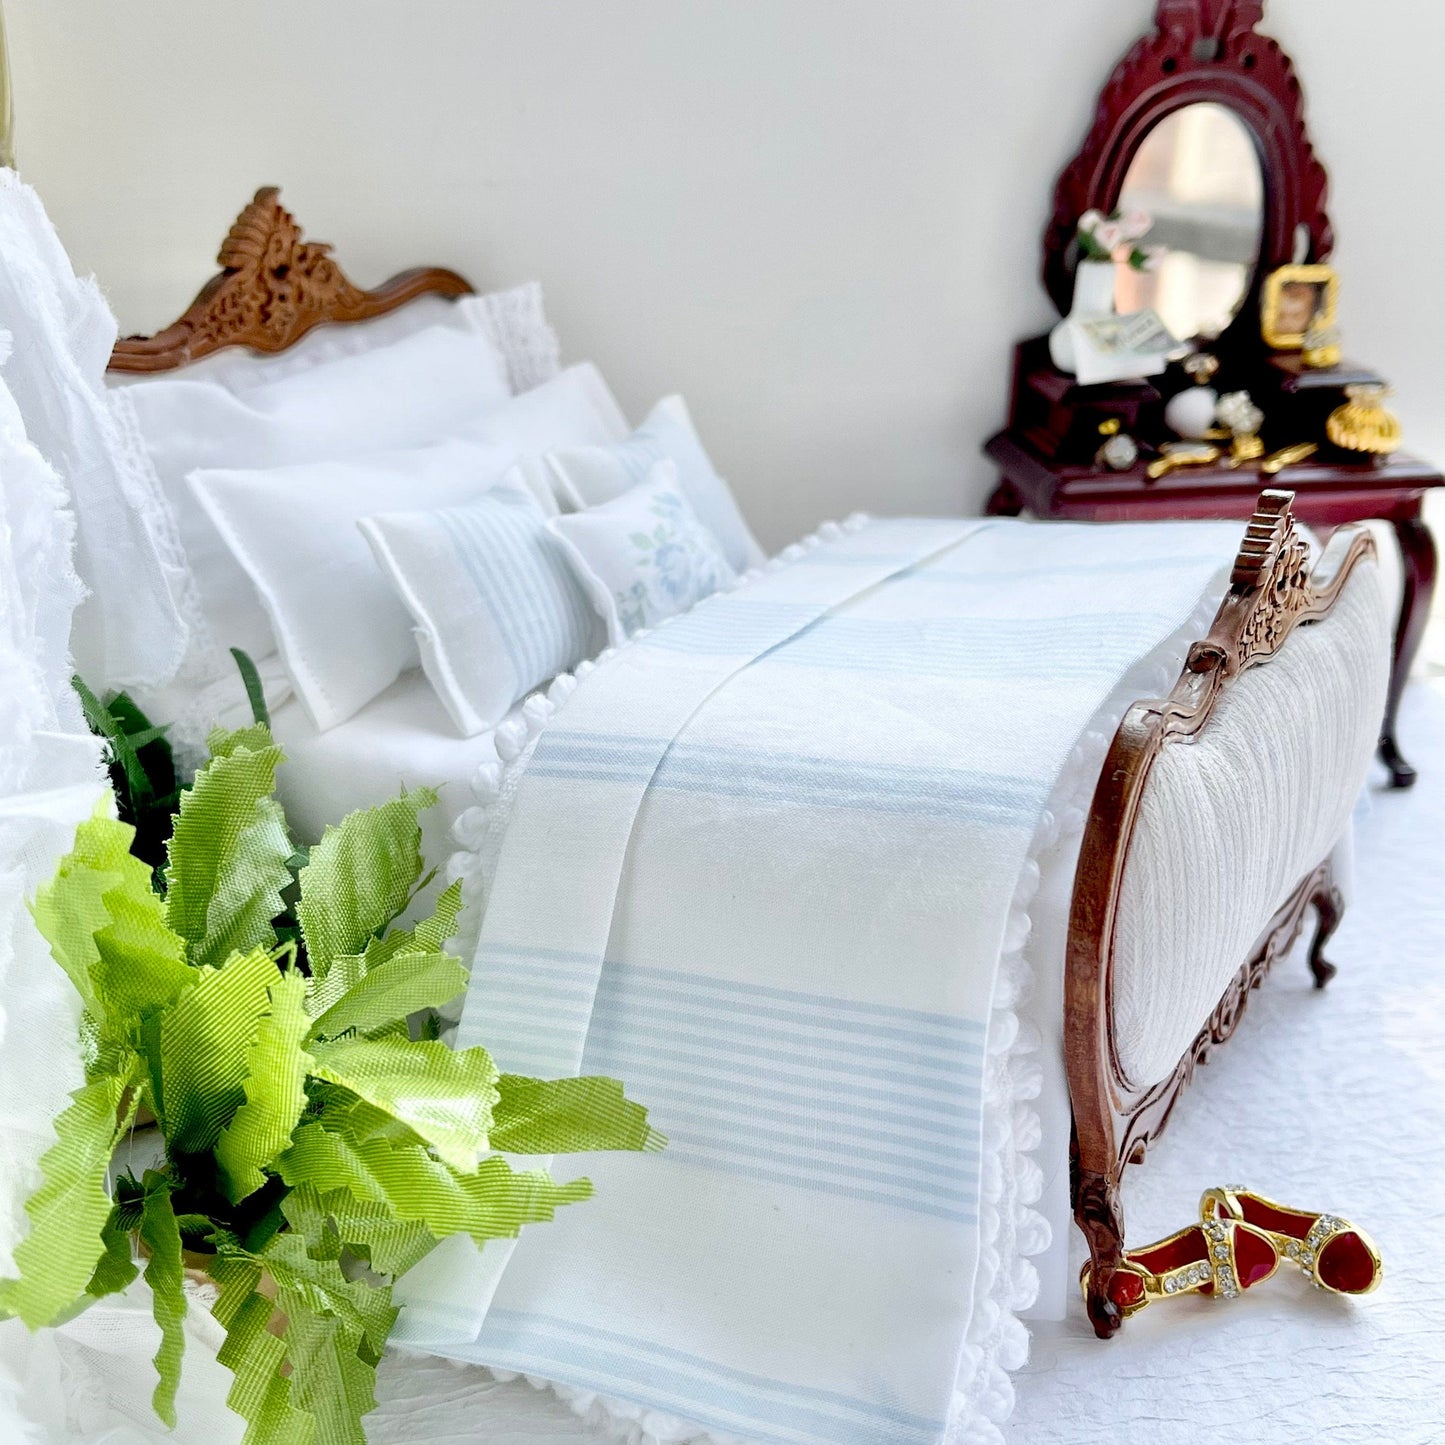 Chantallena Doll House Shabby Cottage -  Eight Piece White Cotton Bedding Set with Blue Striped Bed Runner